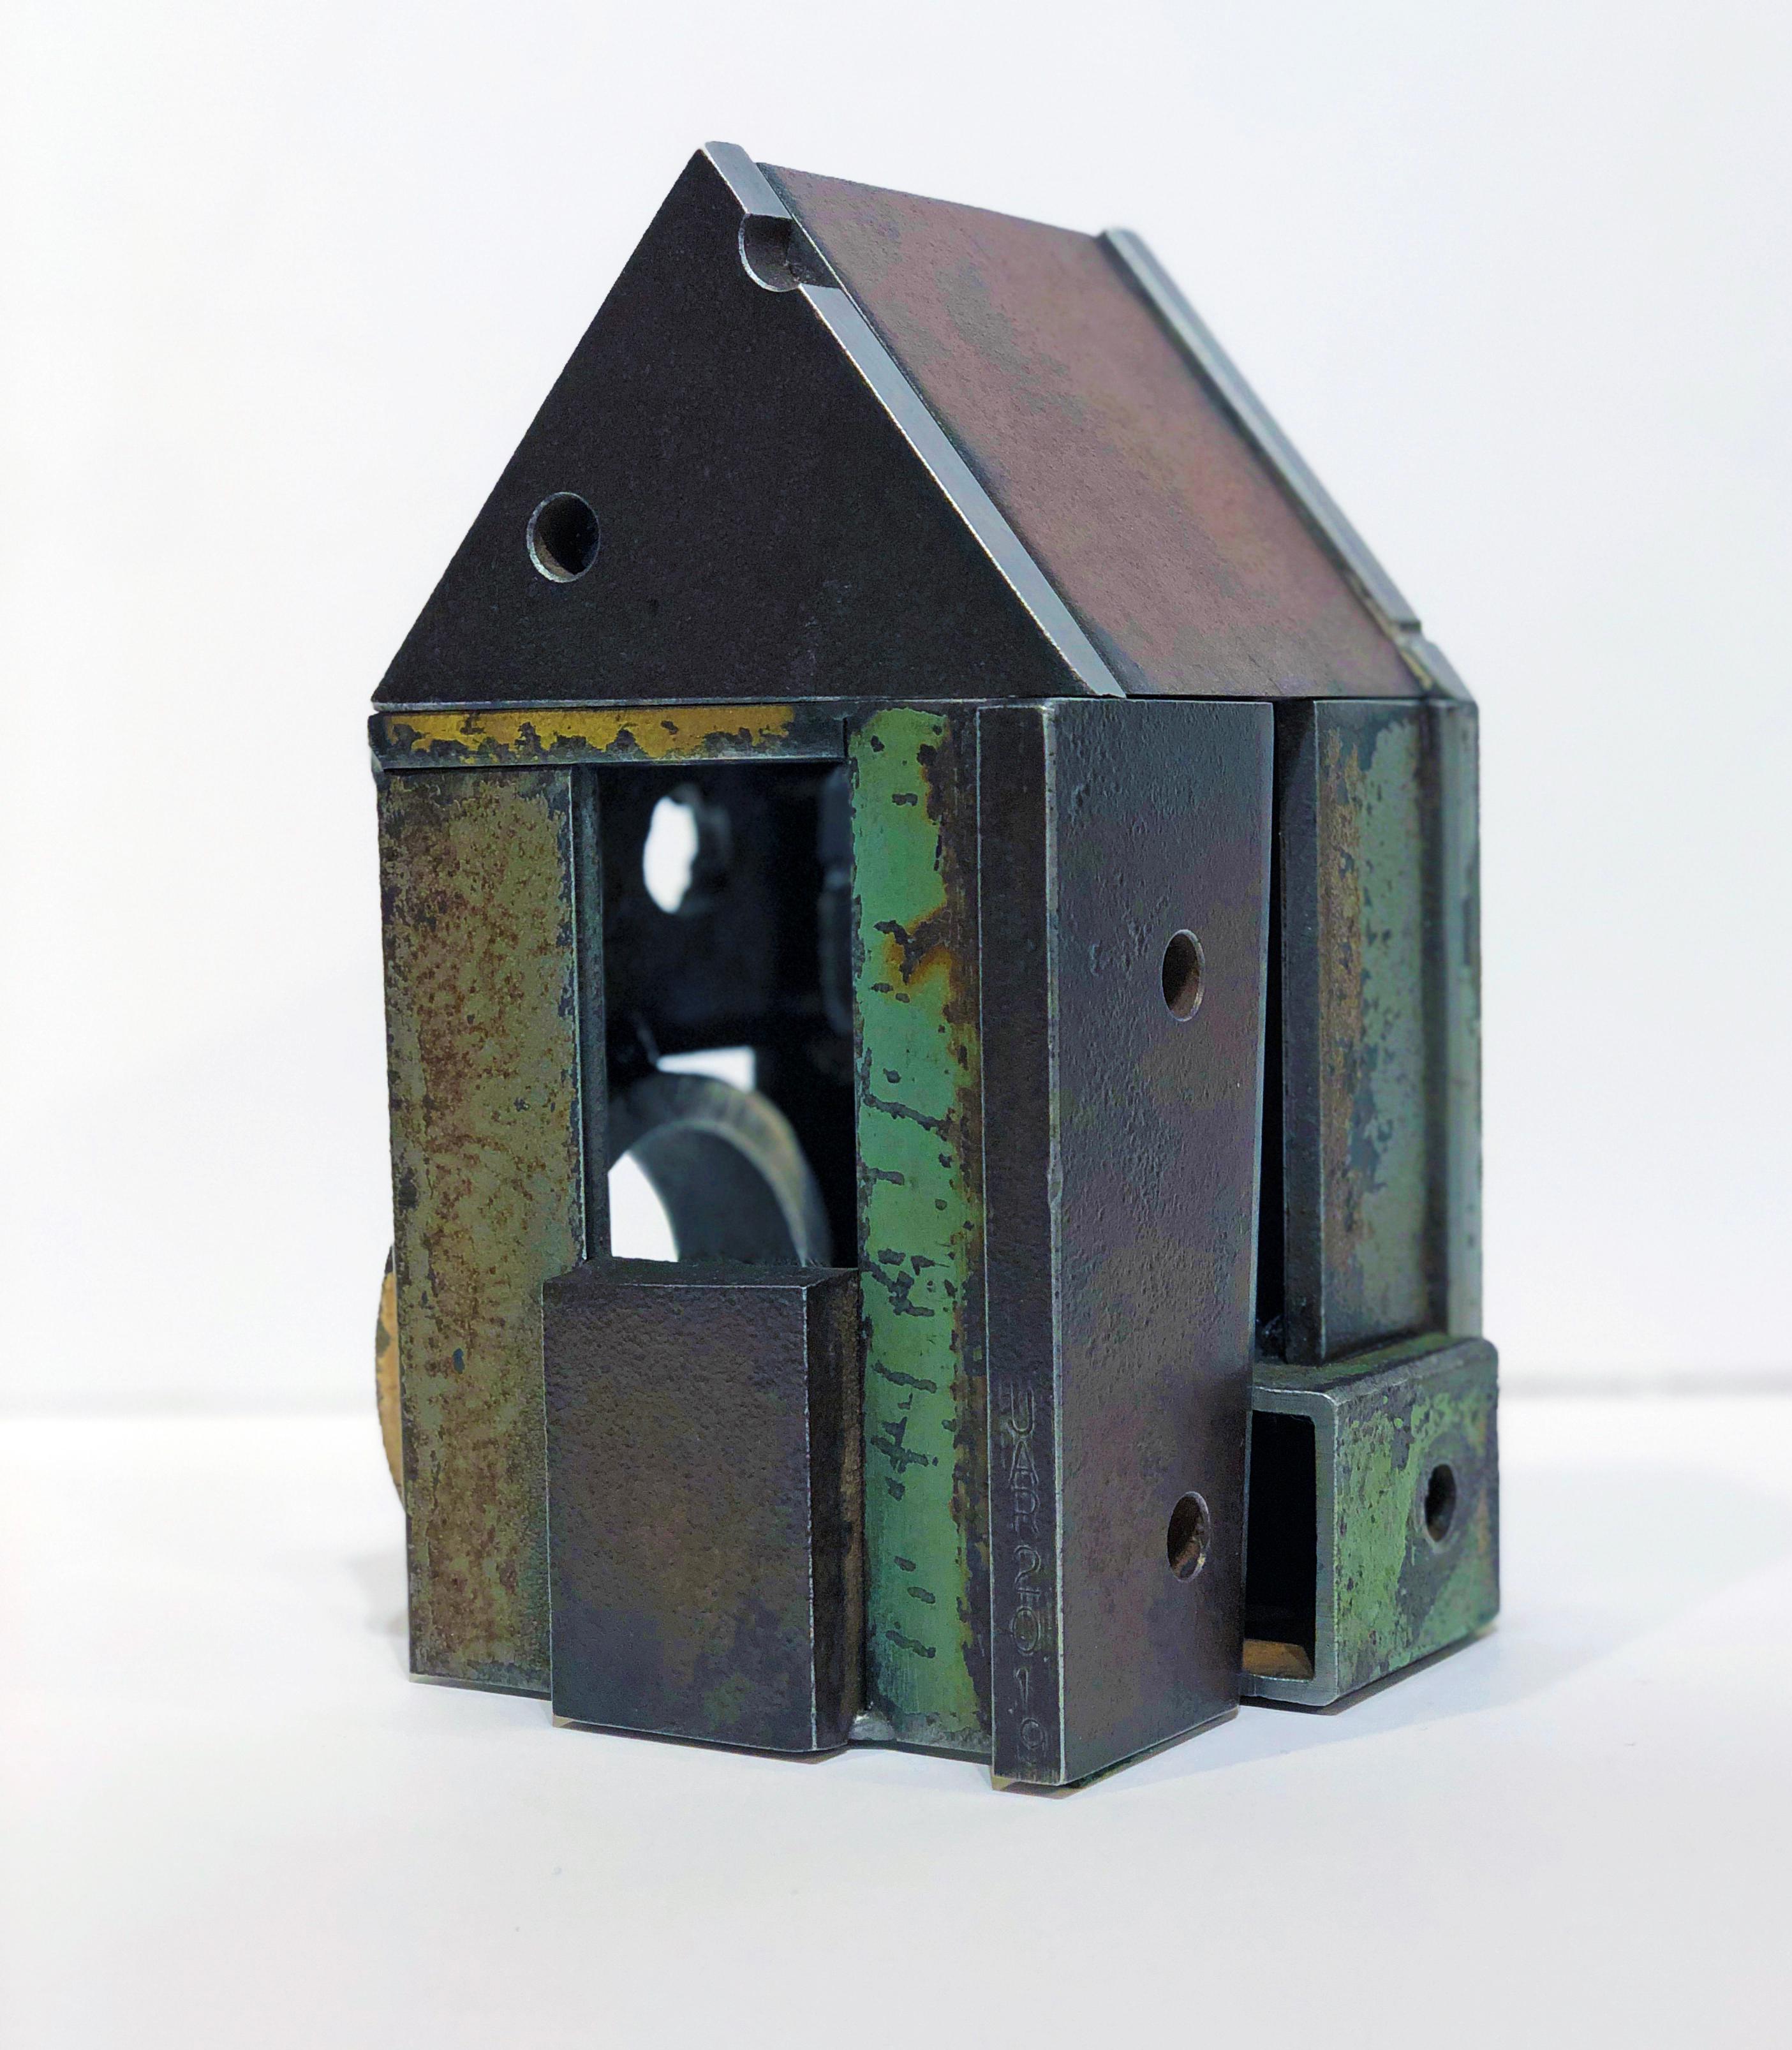 Folk Art Jim Rose Barn House Structure, Welded Steel Object Made with Salvaged Steel